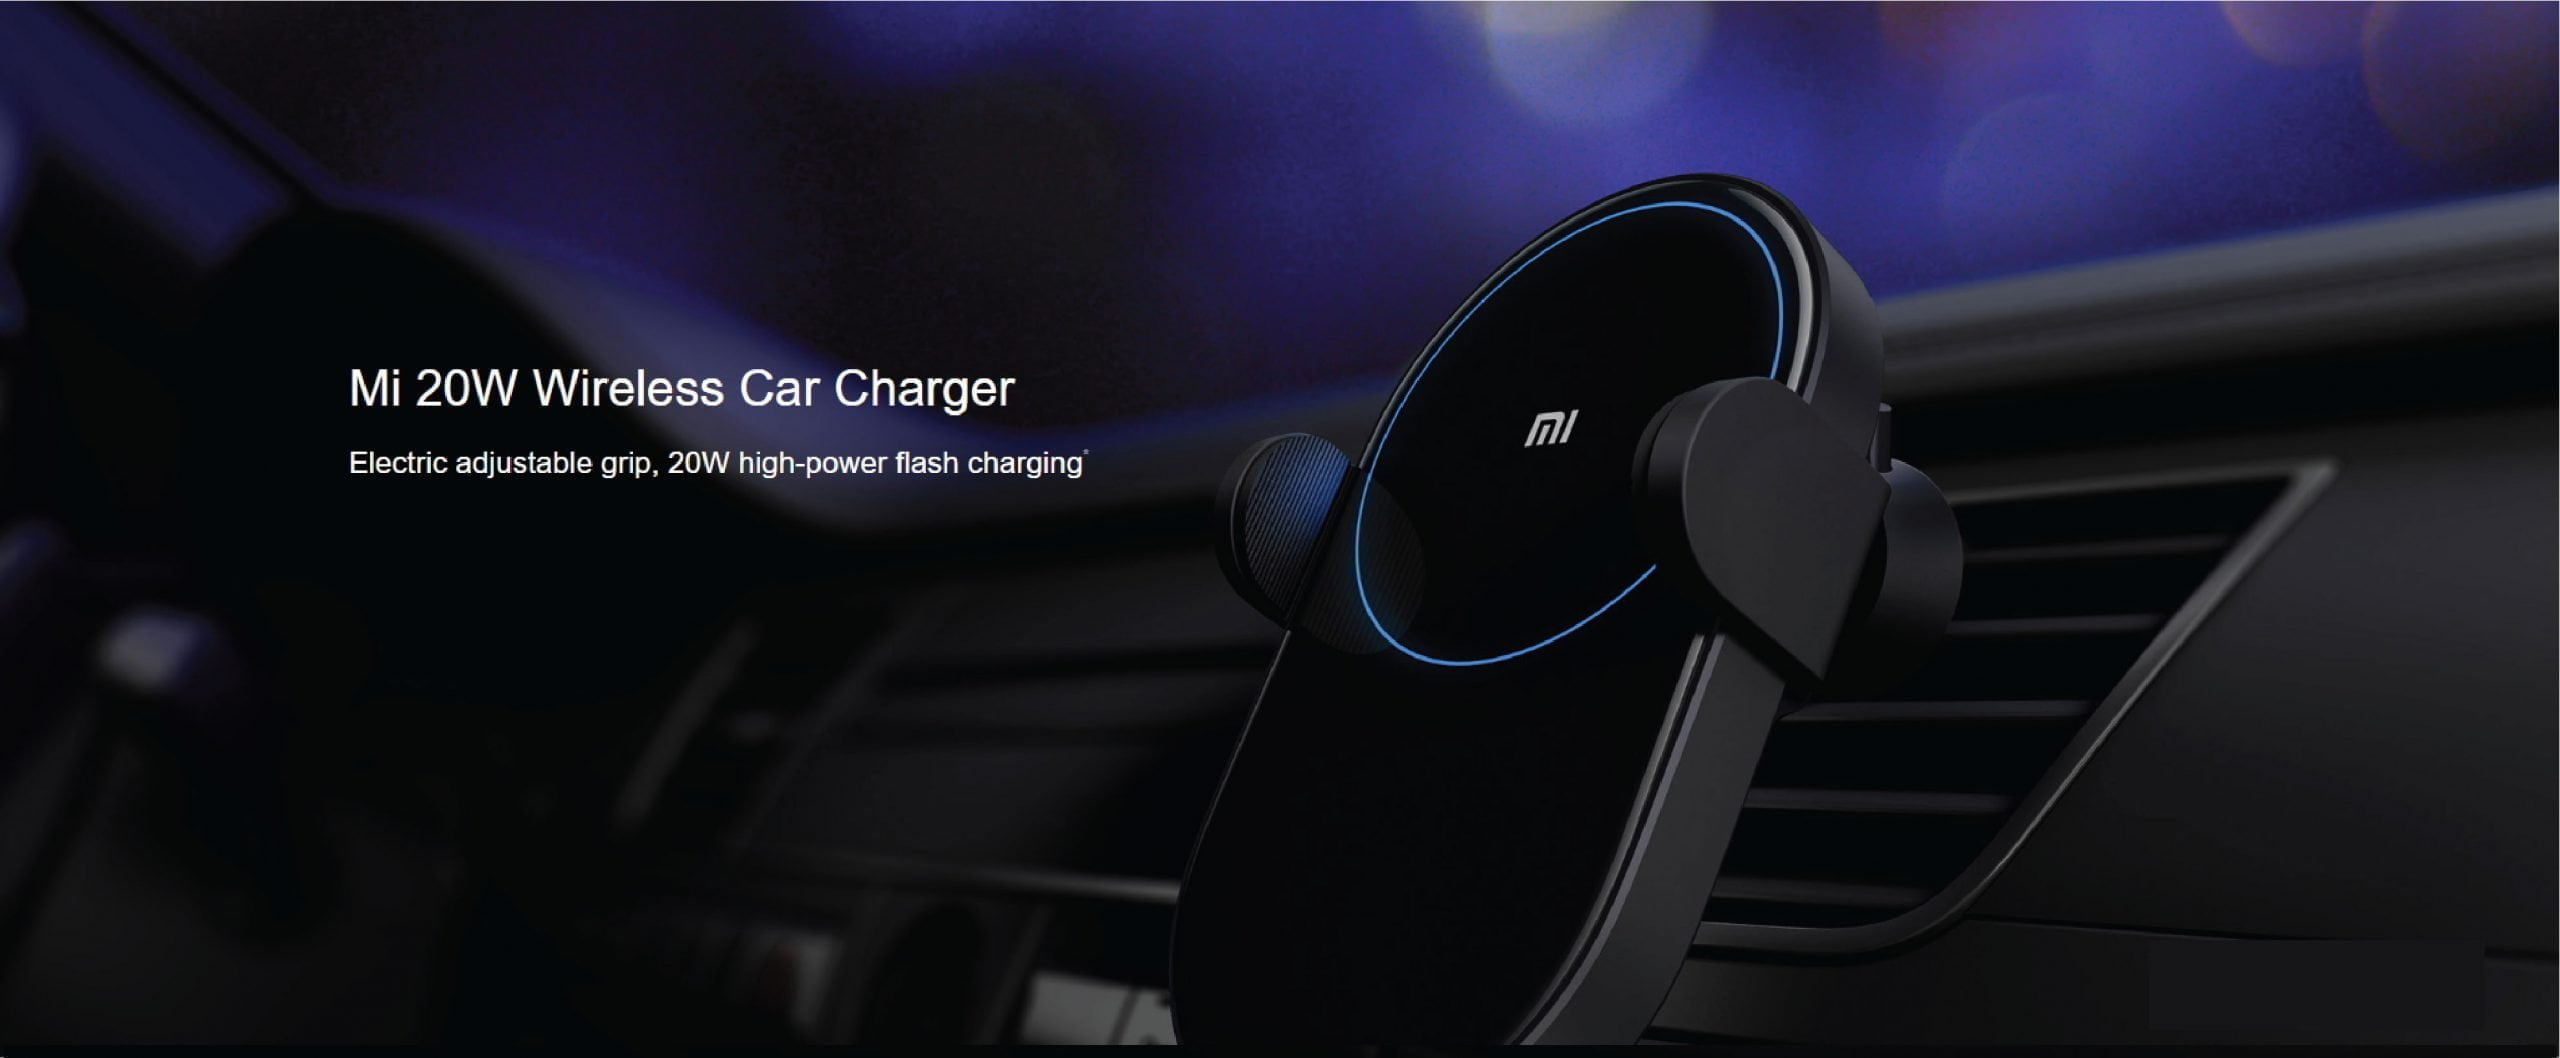 Untitled 1 01 Scaled Https://Lablaab.com/Product/8873/ Https://Lablaab.com/Product/Xiaomi-Wireless-Car-Charger-20W-Max-Power-Inductive-Electric-Clamp-Arm-Double-Heat-Dissipation-Fast-Charging-Black/ Xiaomi Xiaomi Mi Sphere Camera Kit &Amp; Xiaomi Mi 20W Wireless Car Charger – Black